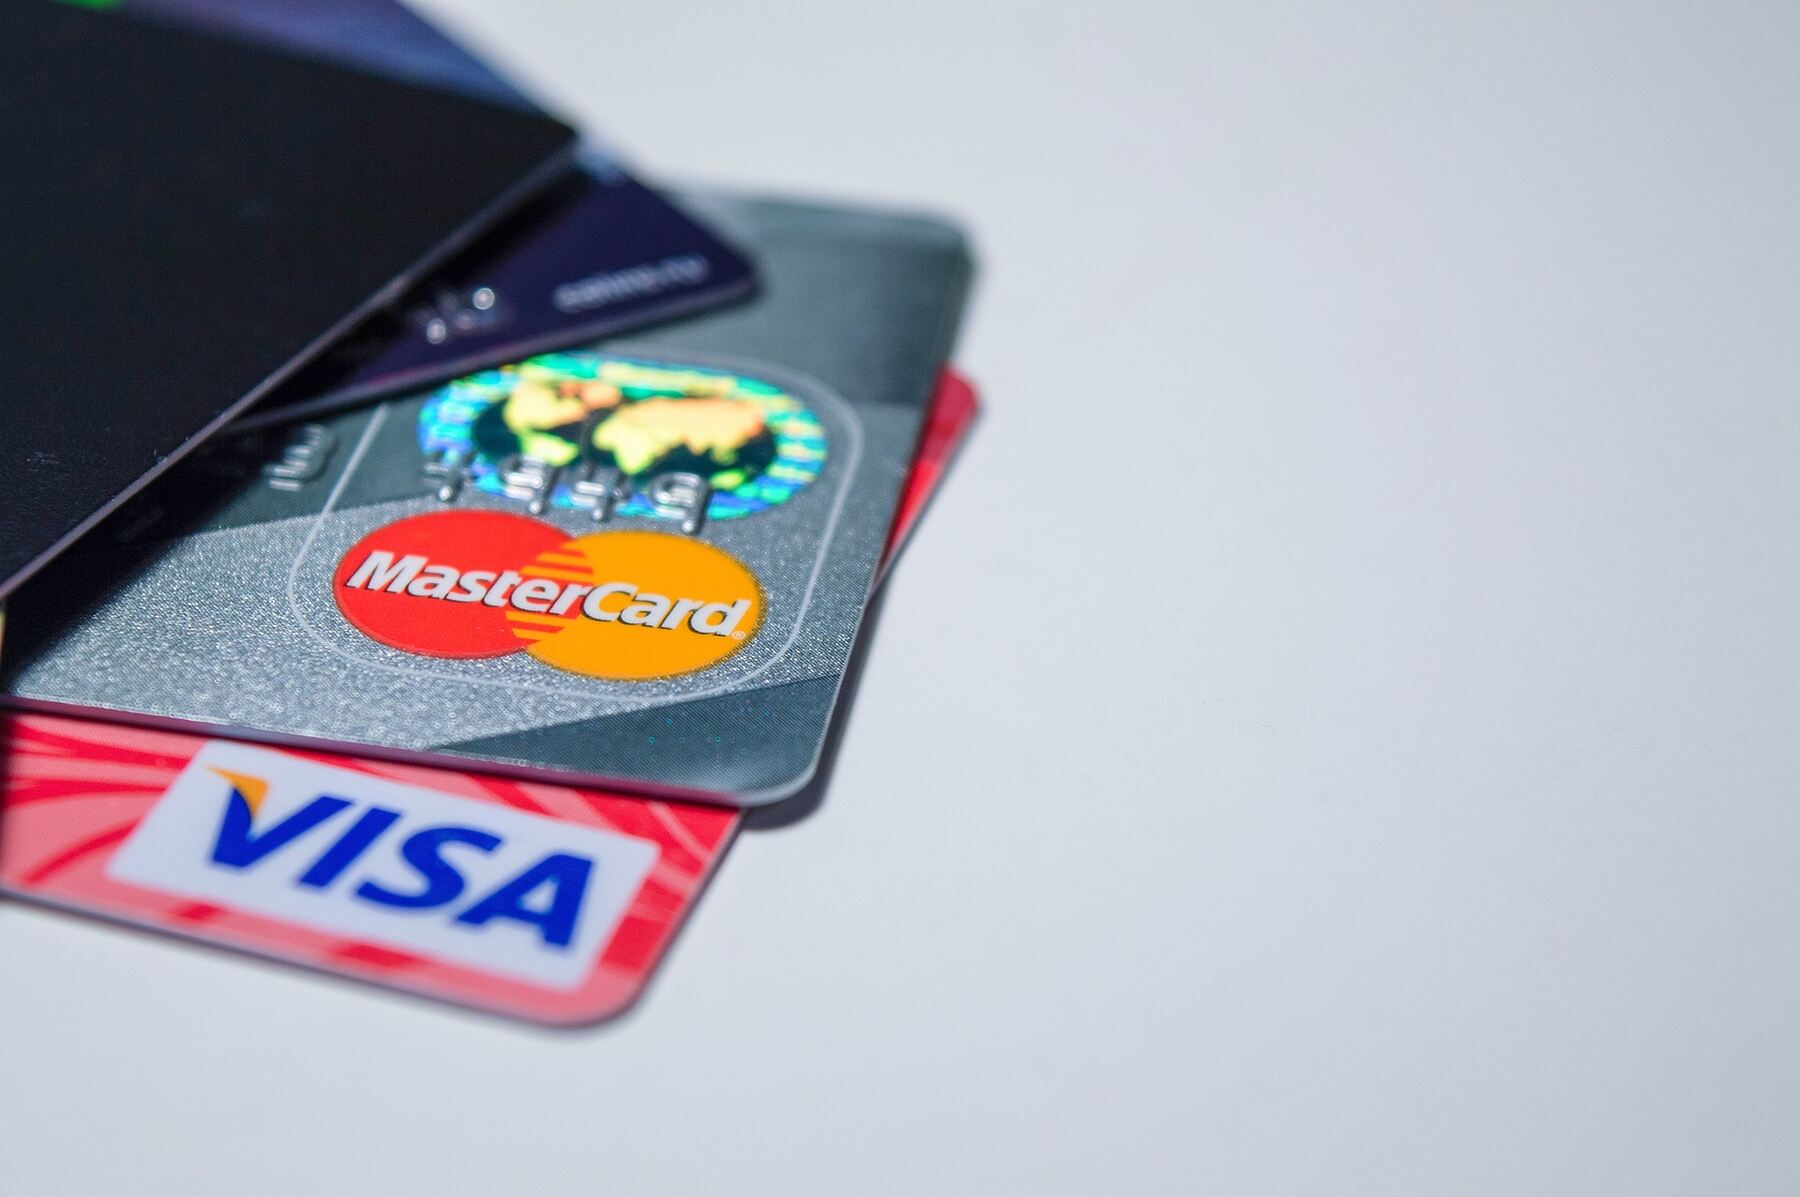 Mastercard and Visa card inserted on the table